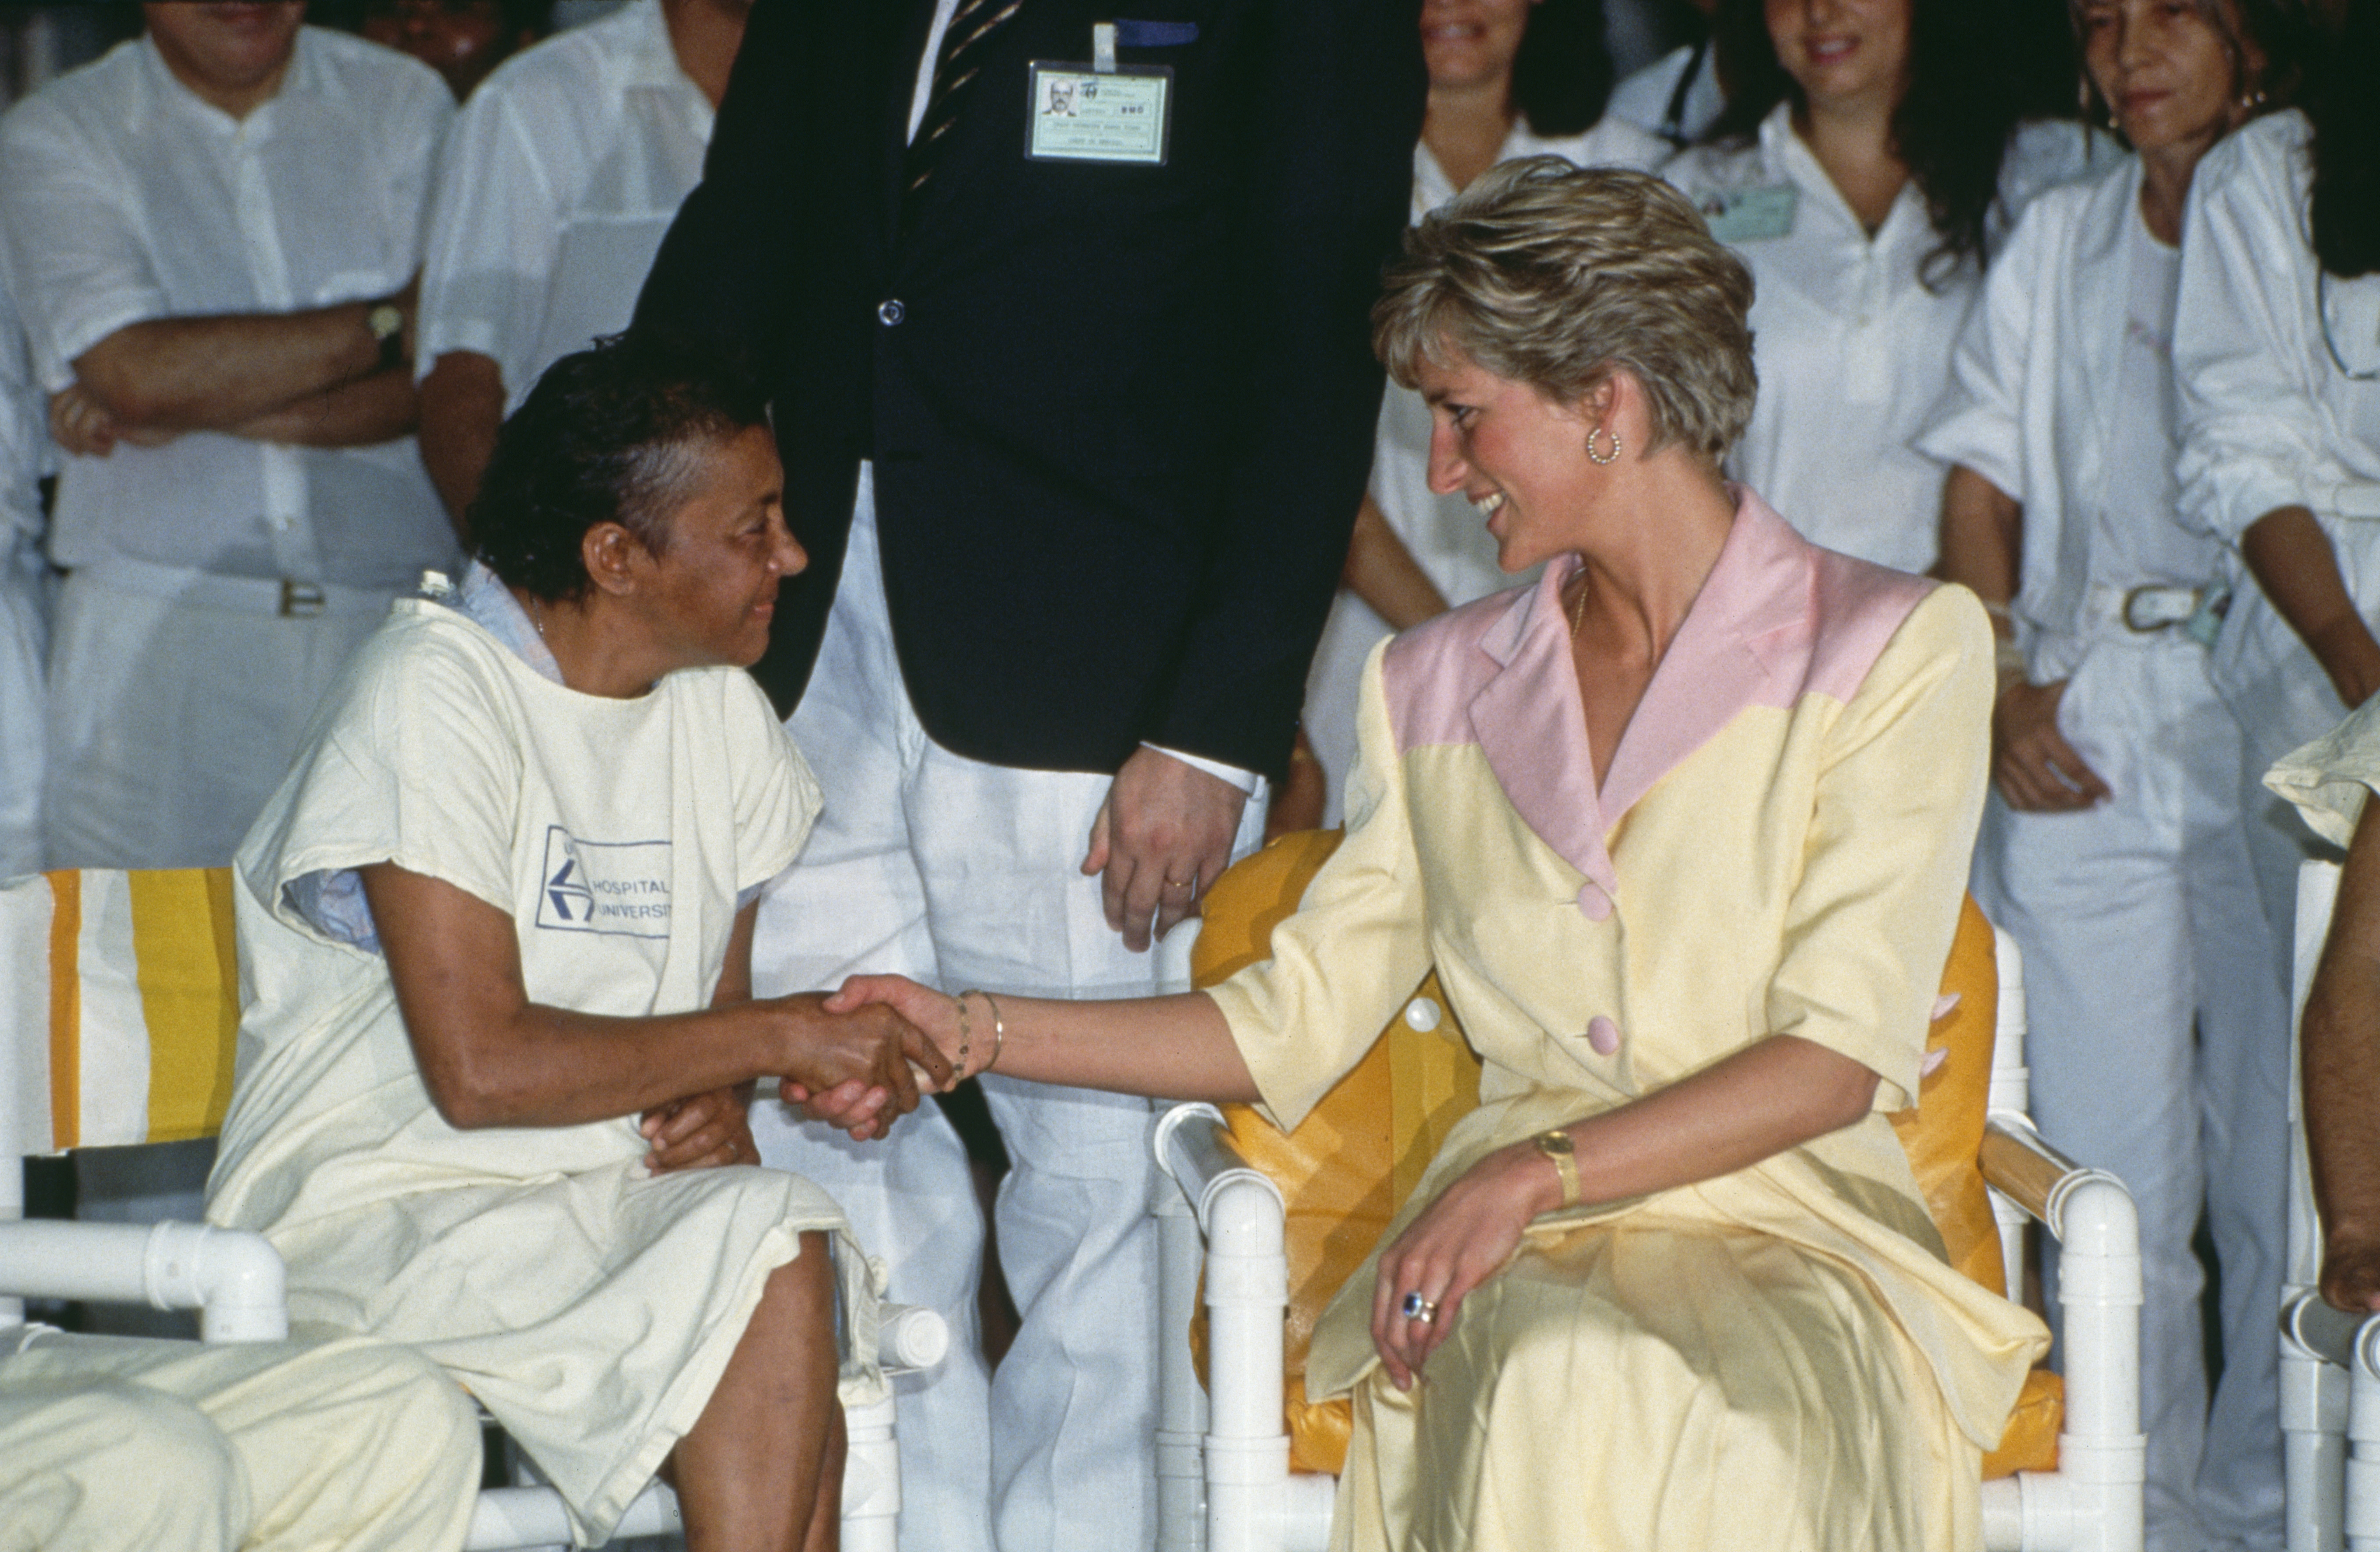 Princess Diana visiting patients suffering from AIDS at the Hospital Universidade in Rio de Janeiro, Brazil, 25th April 1991 | Source: Getty Images